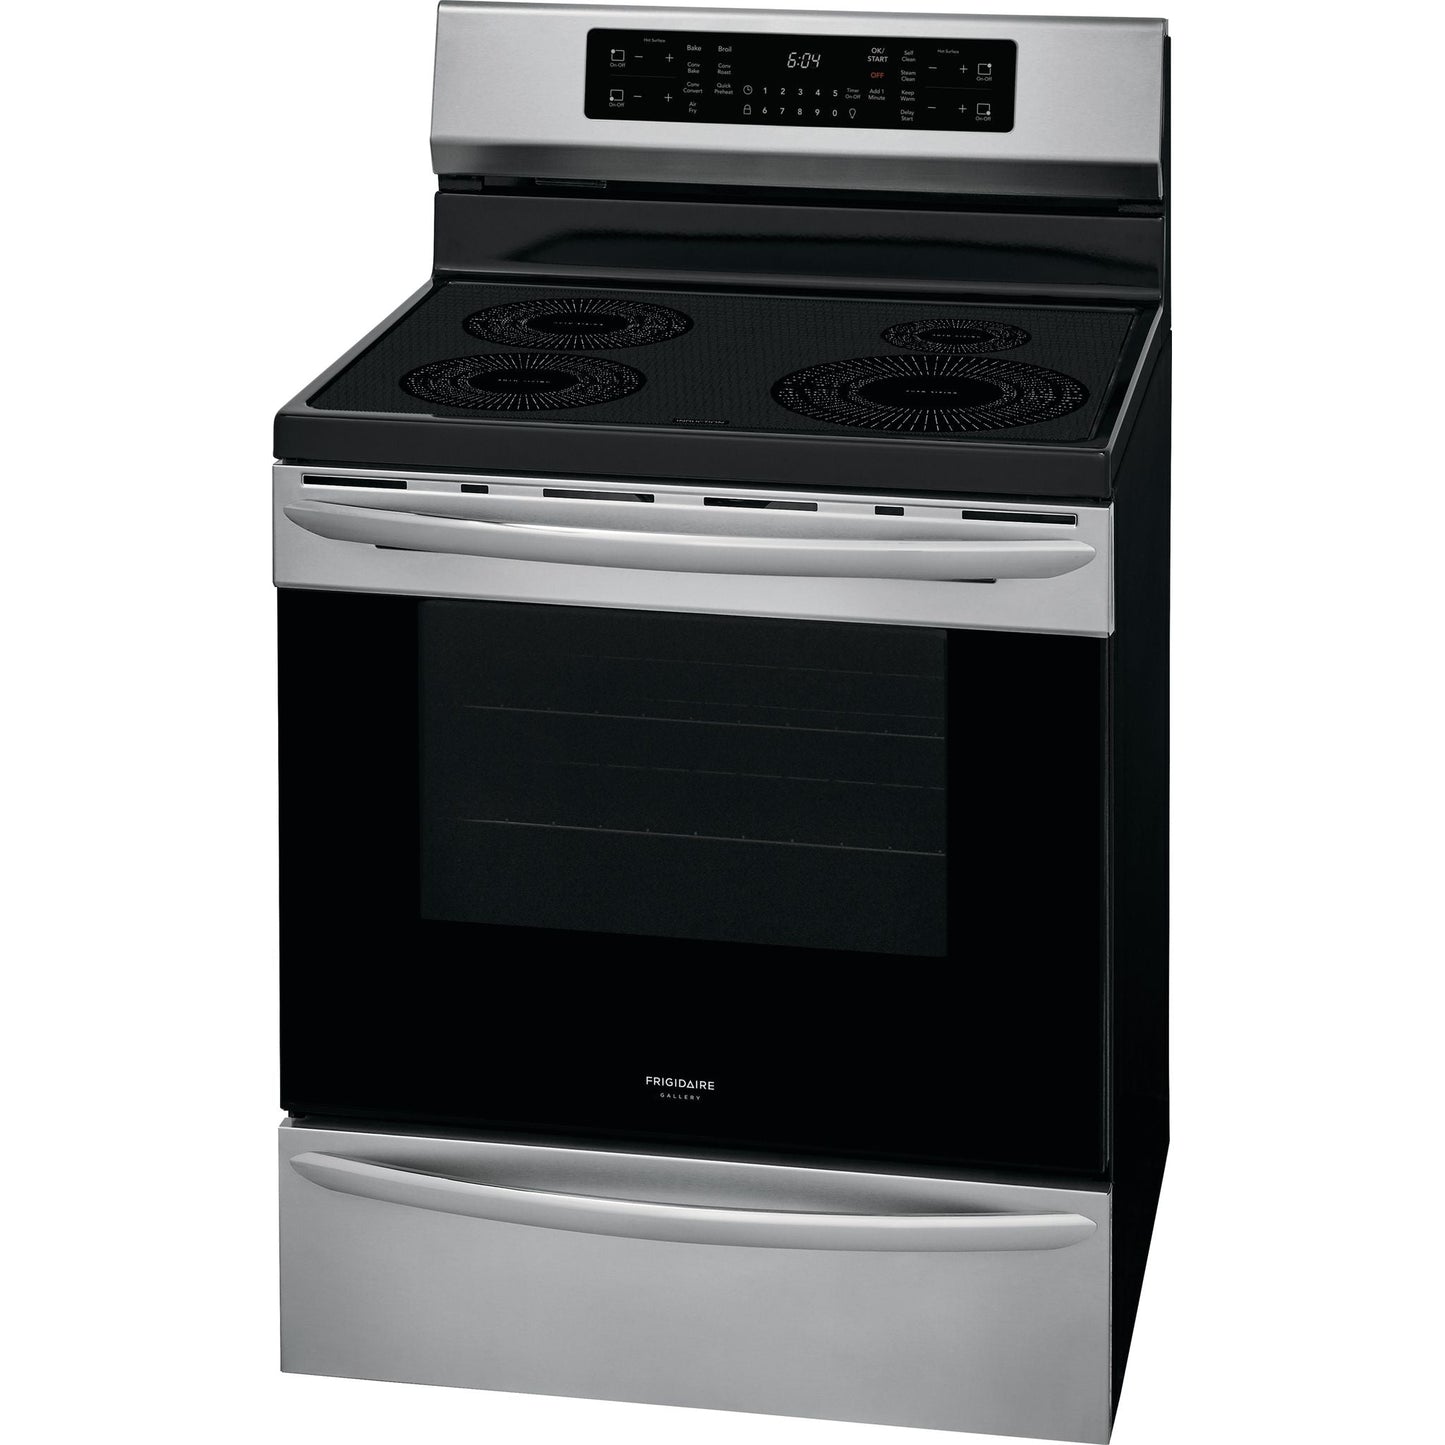 Frigidaire Gallery Induction Range (GCRI305CAF) - Stainless Steel